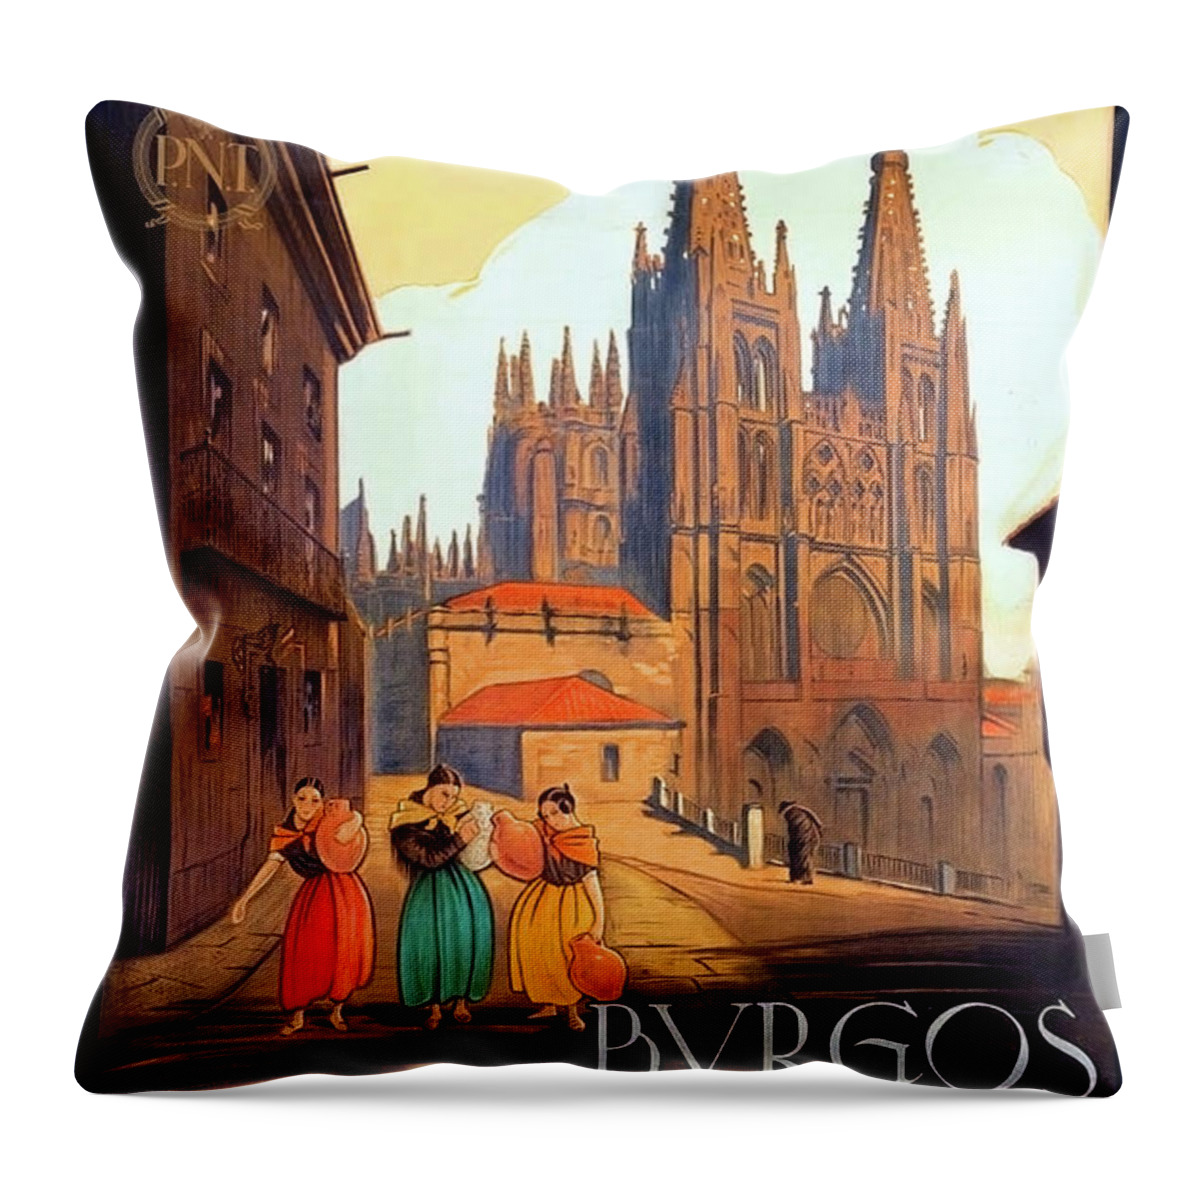 Burgos Throw Pillow featuring the painting Burgos Cathedral, Spain, vintage travel poster by Long Shot